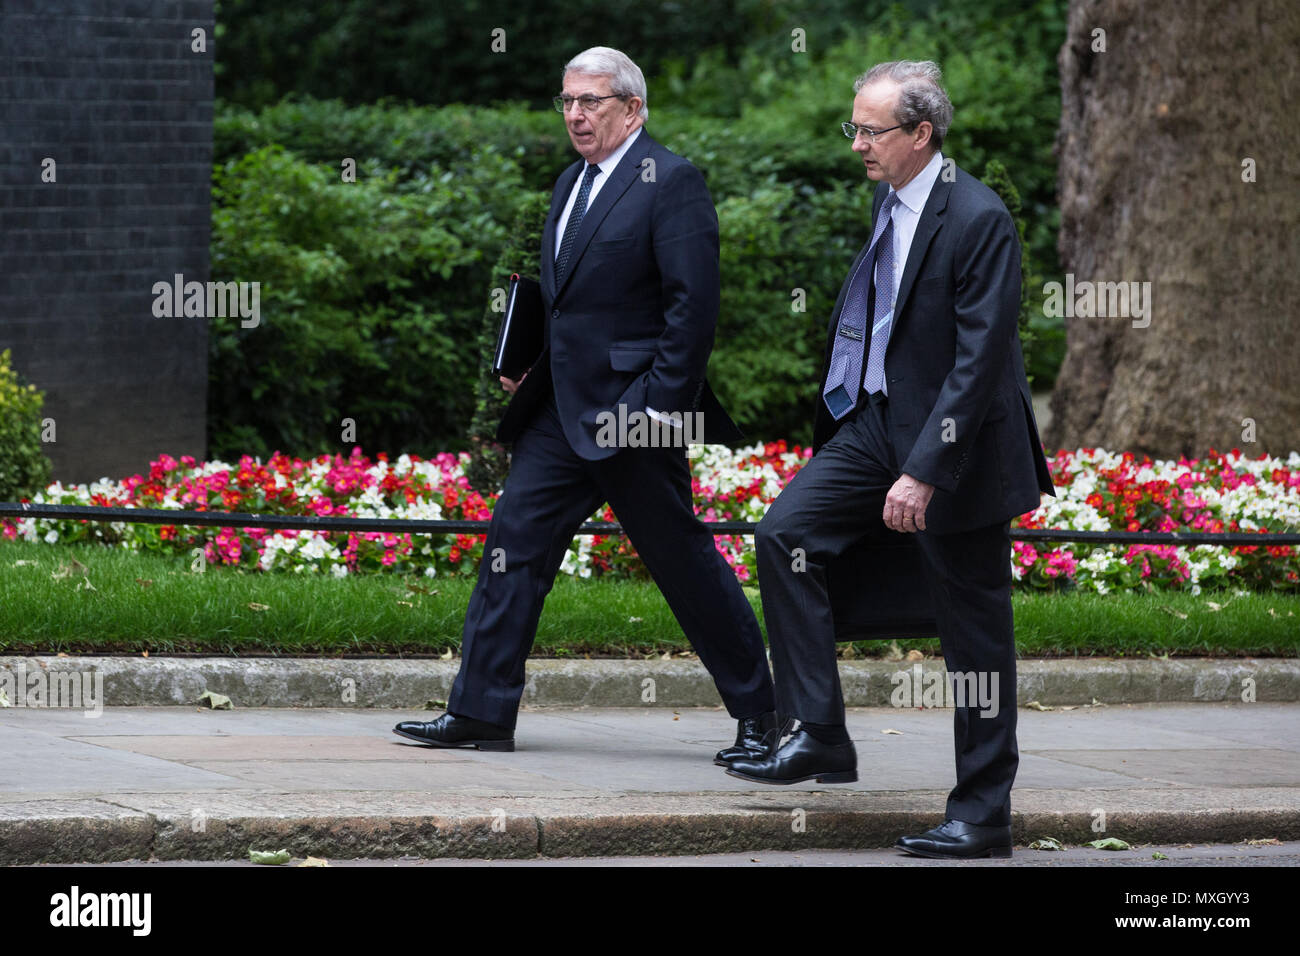 London, UK. 4th June, 2018. Sir Roger Carr (l), Chairman of BAE Systems, and Robert Noel, Chief Executive of Land Securities, arrive at 10 Downing Street for a Business Advisory Council meeting during which leaders of some of the UK's largest businesses would be provided with an update regarding Brexit talks by Prime Minister Theresa May and Government Ministers. Business leaders present included GlaxoSmithKline Chief Executive Emma Walmsley, Tesco Chairman Dave Lewis and BT Chief Executive Gavin Patterson. Credit: Mark Kerrison/Alamy Live News Stock Photo